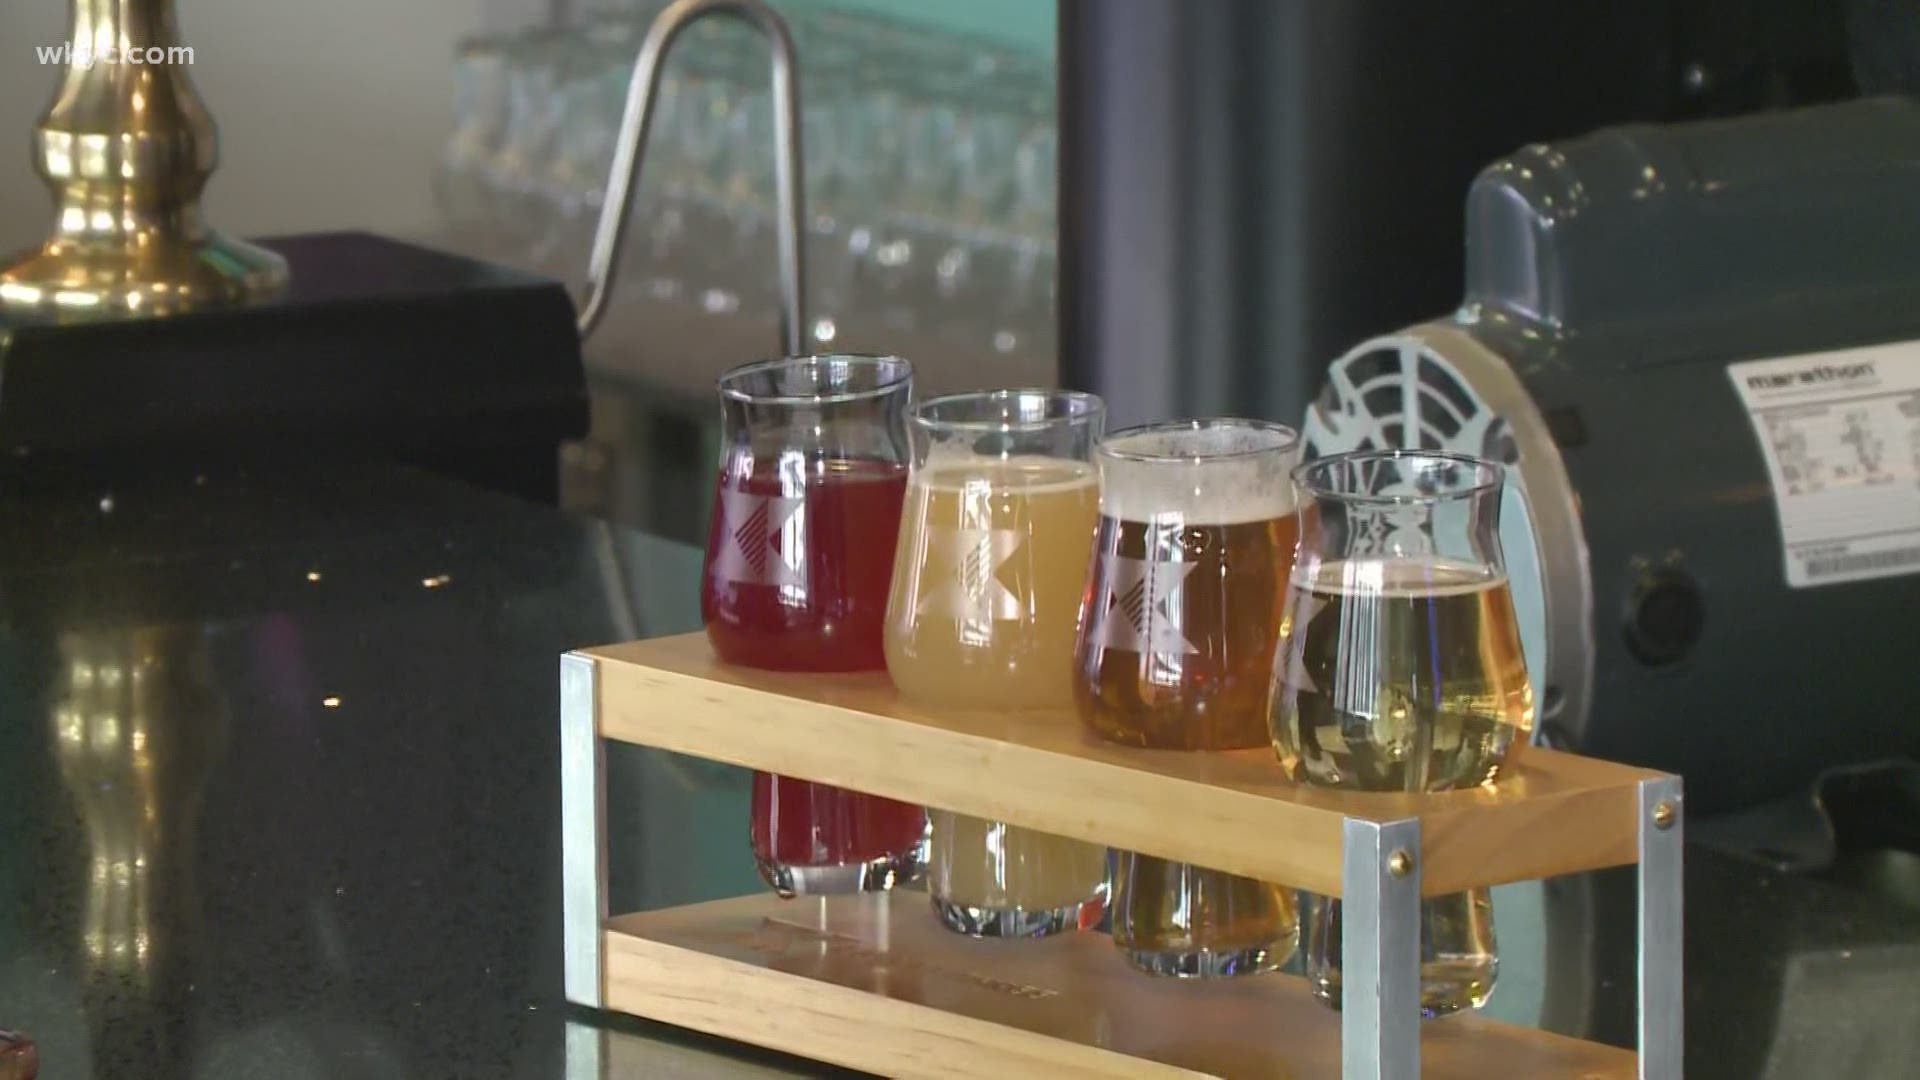 A Look At What Eighty-Three Brewery Has To Offer As A Part of The Summit Brew Path.